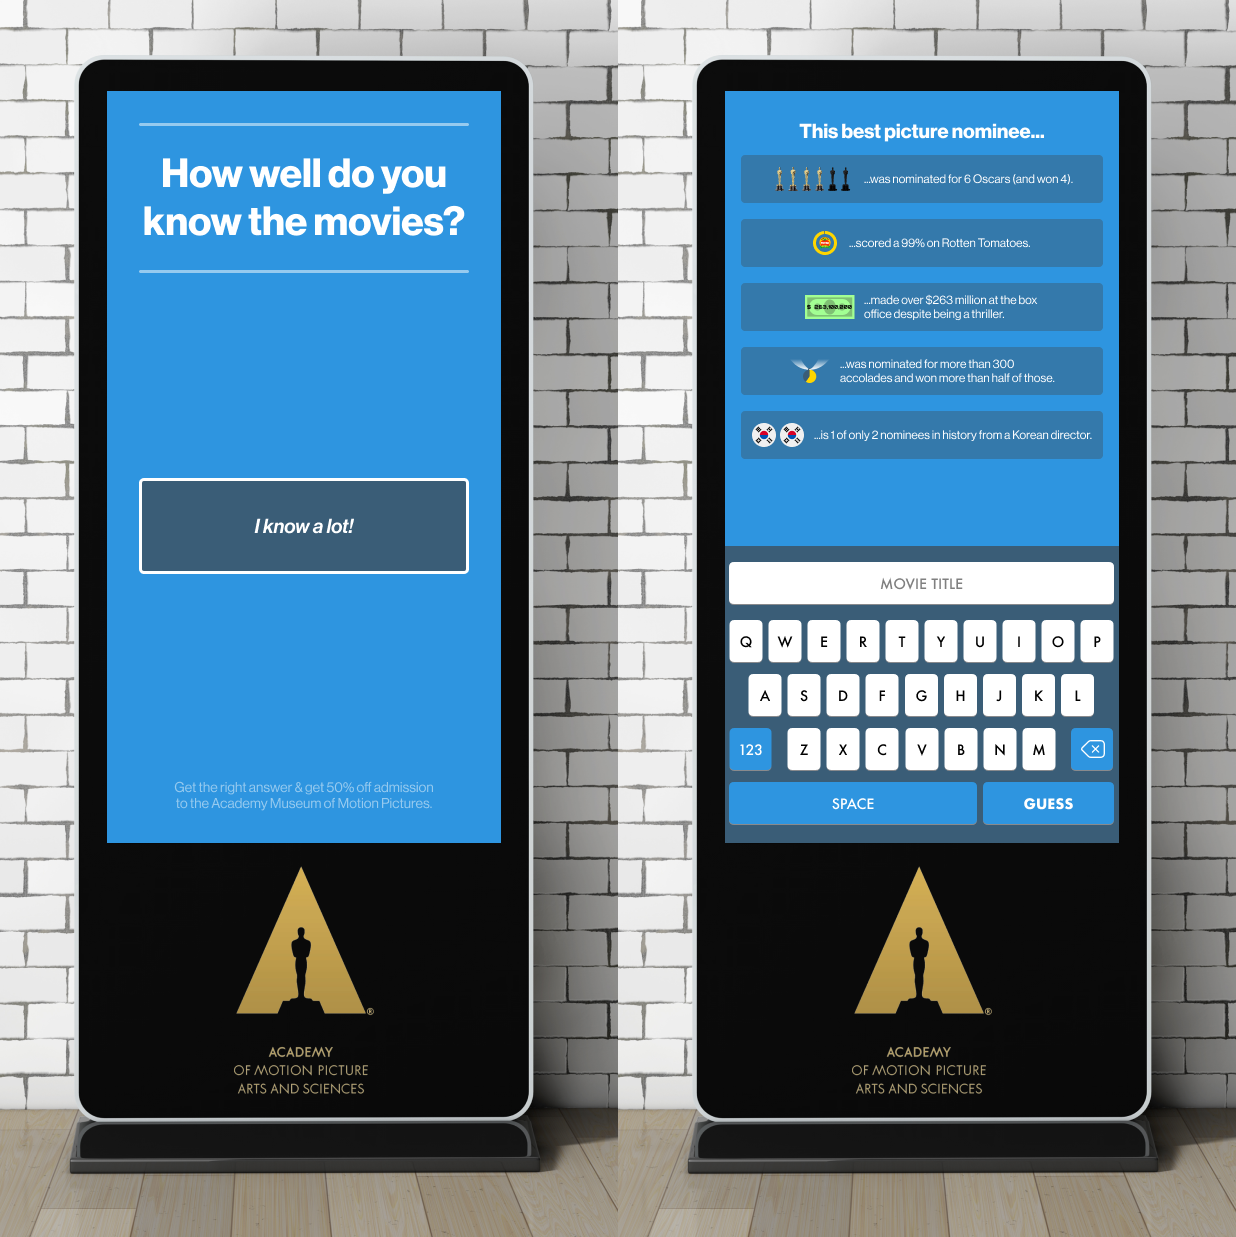 A preview image showing 2 different stages of an app working on a physical, touch screen kiosk.